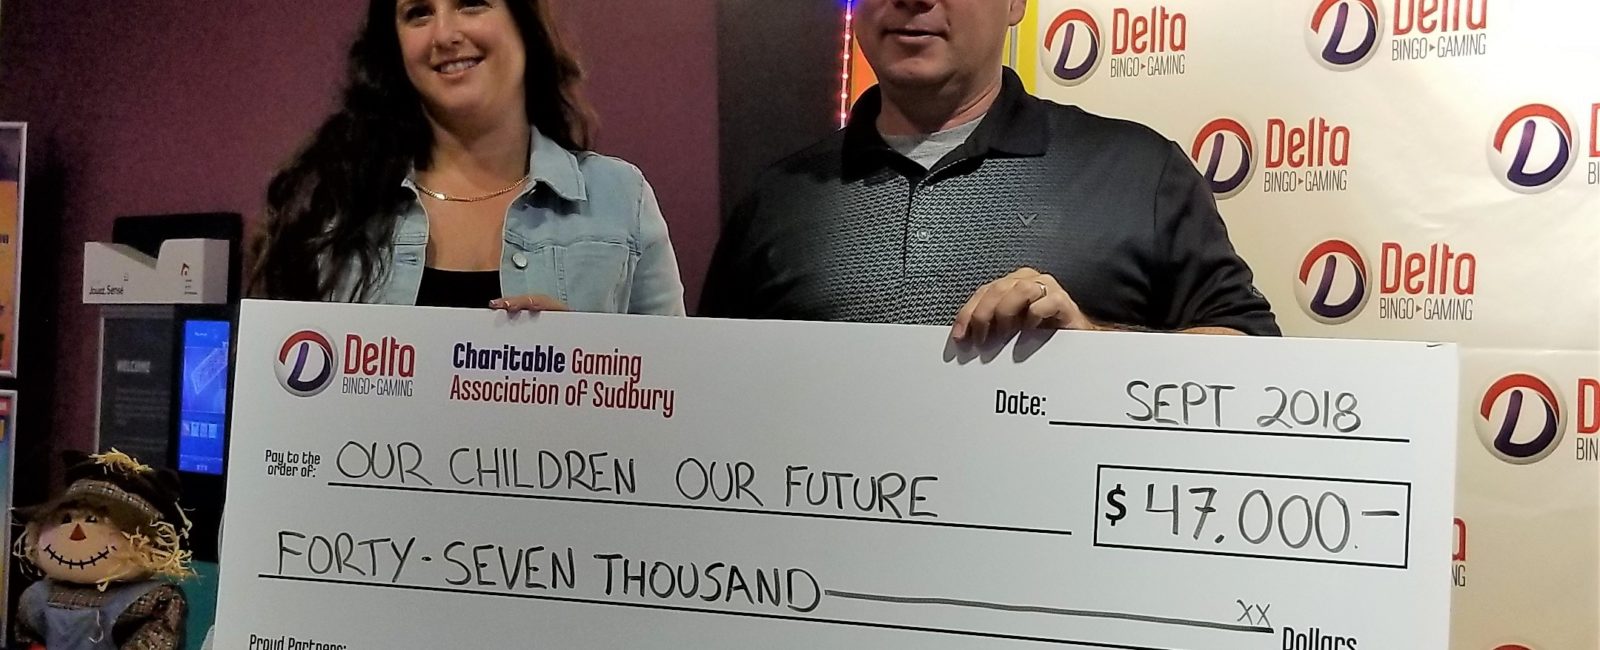 Over $47,000 raised for Our Children Our Future